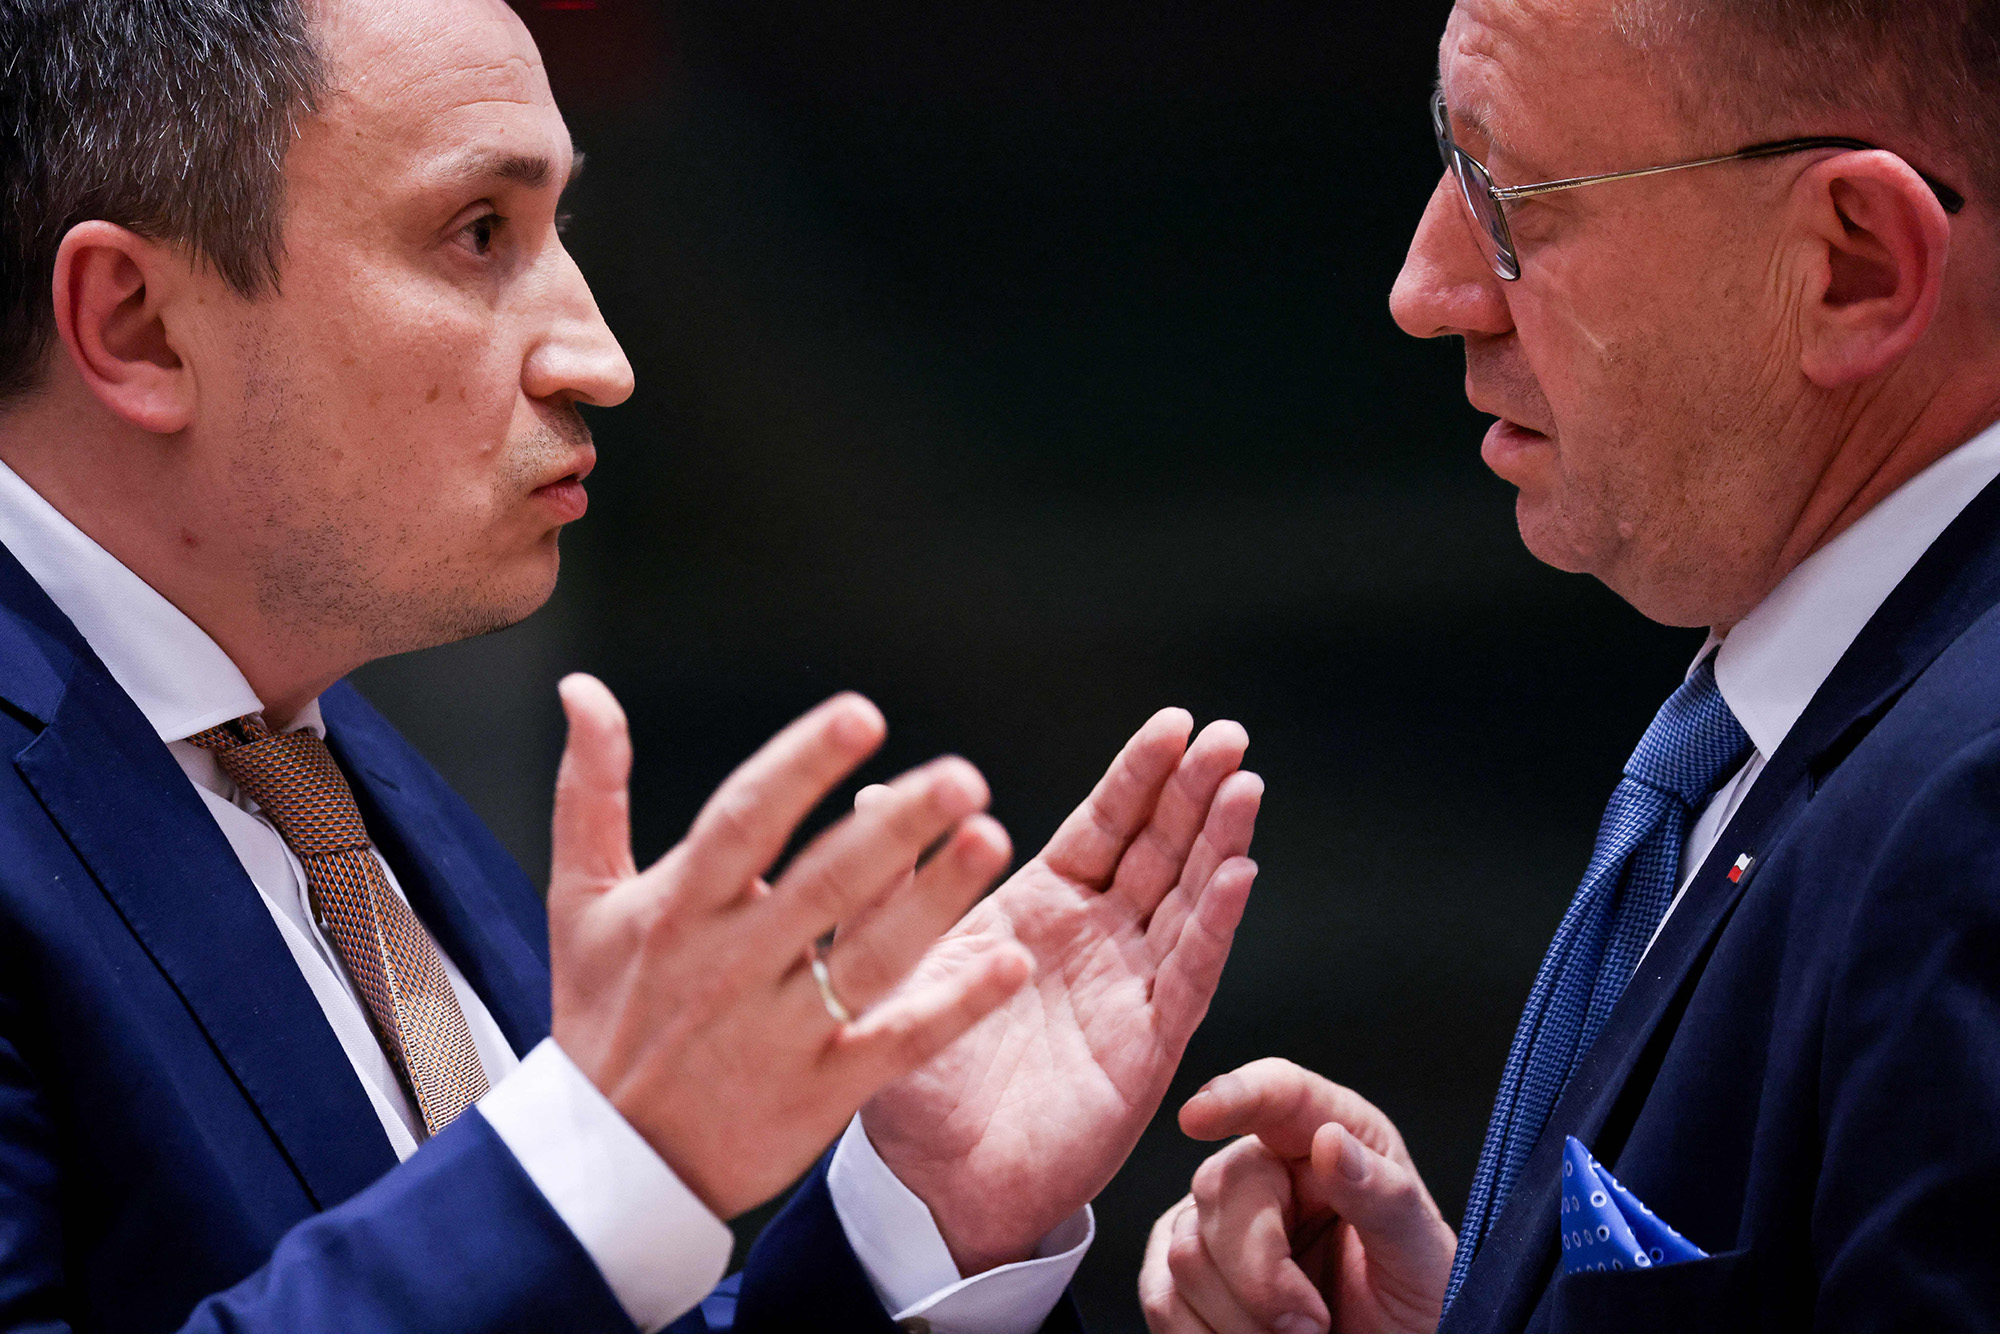 Ukraine's Minister of Agrarian Policy and Food Mykola Solskyi, left, speaks with Poland's Minister for Agriculture, Robert Telus, at the Agriculture and Fisheries Council at the EU headquarters in Brussels, Belgium, on May 30.